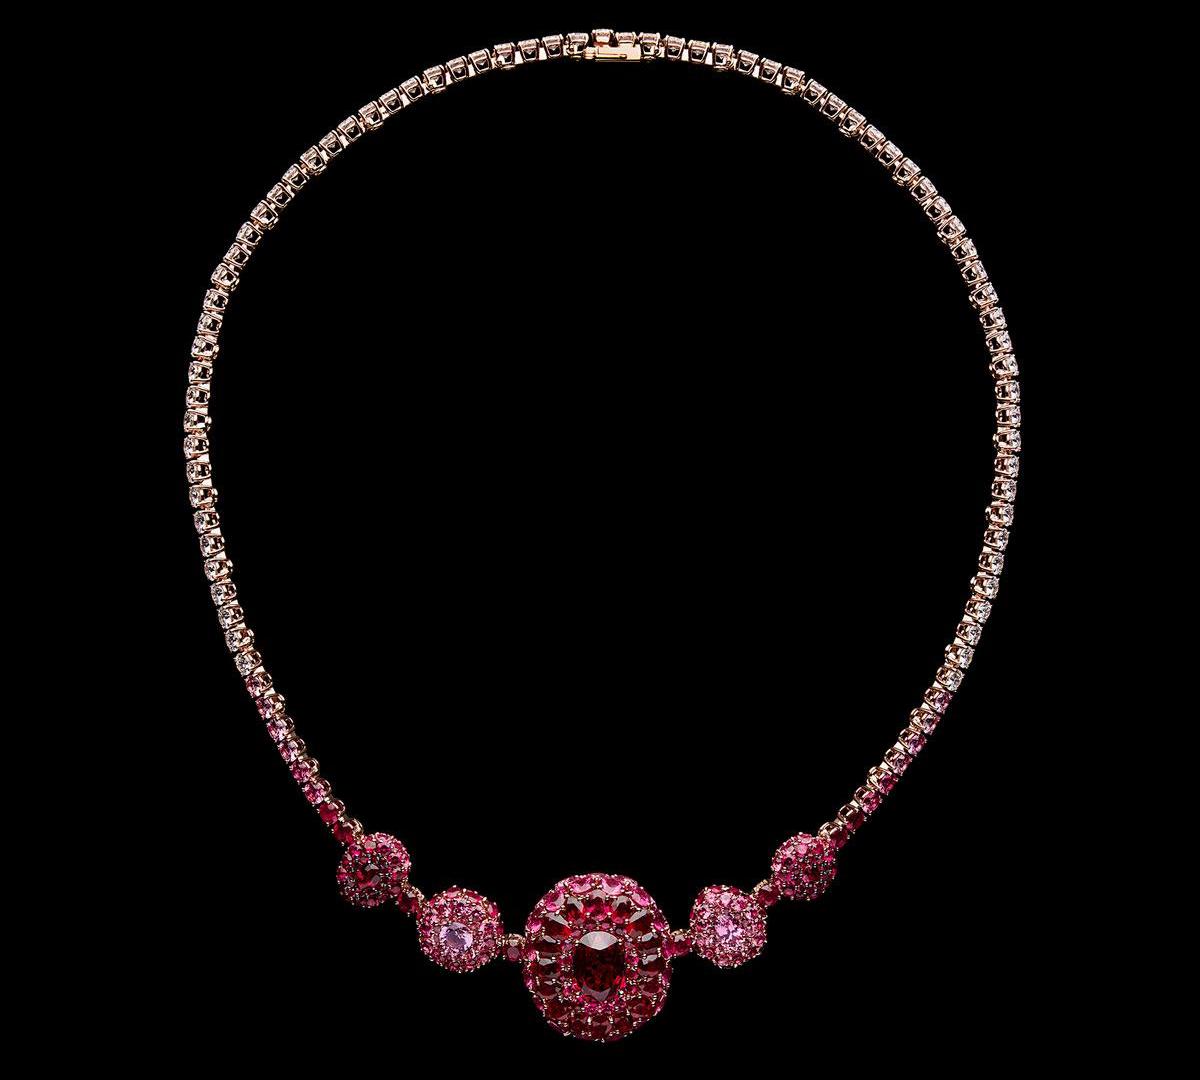 Dior's new high jewelry collection pays homage to Christian Dior's favorite  flower. (Its the rose) - Luxurylaunches